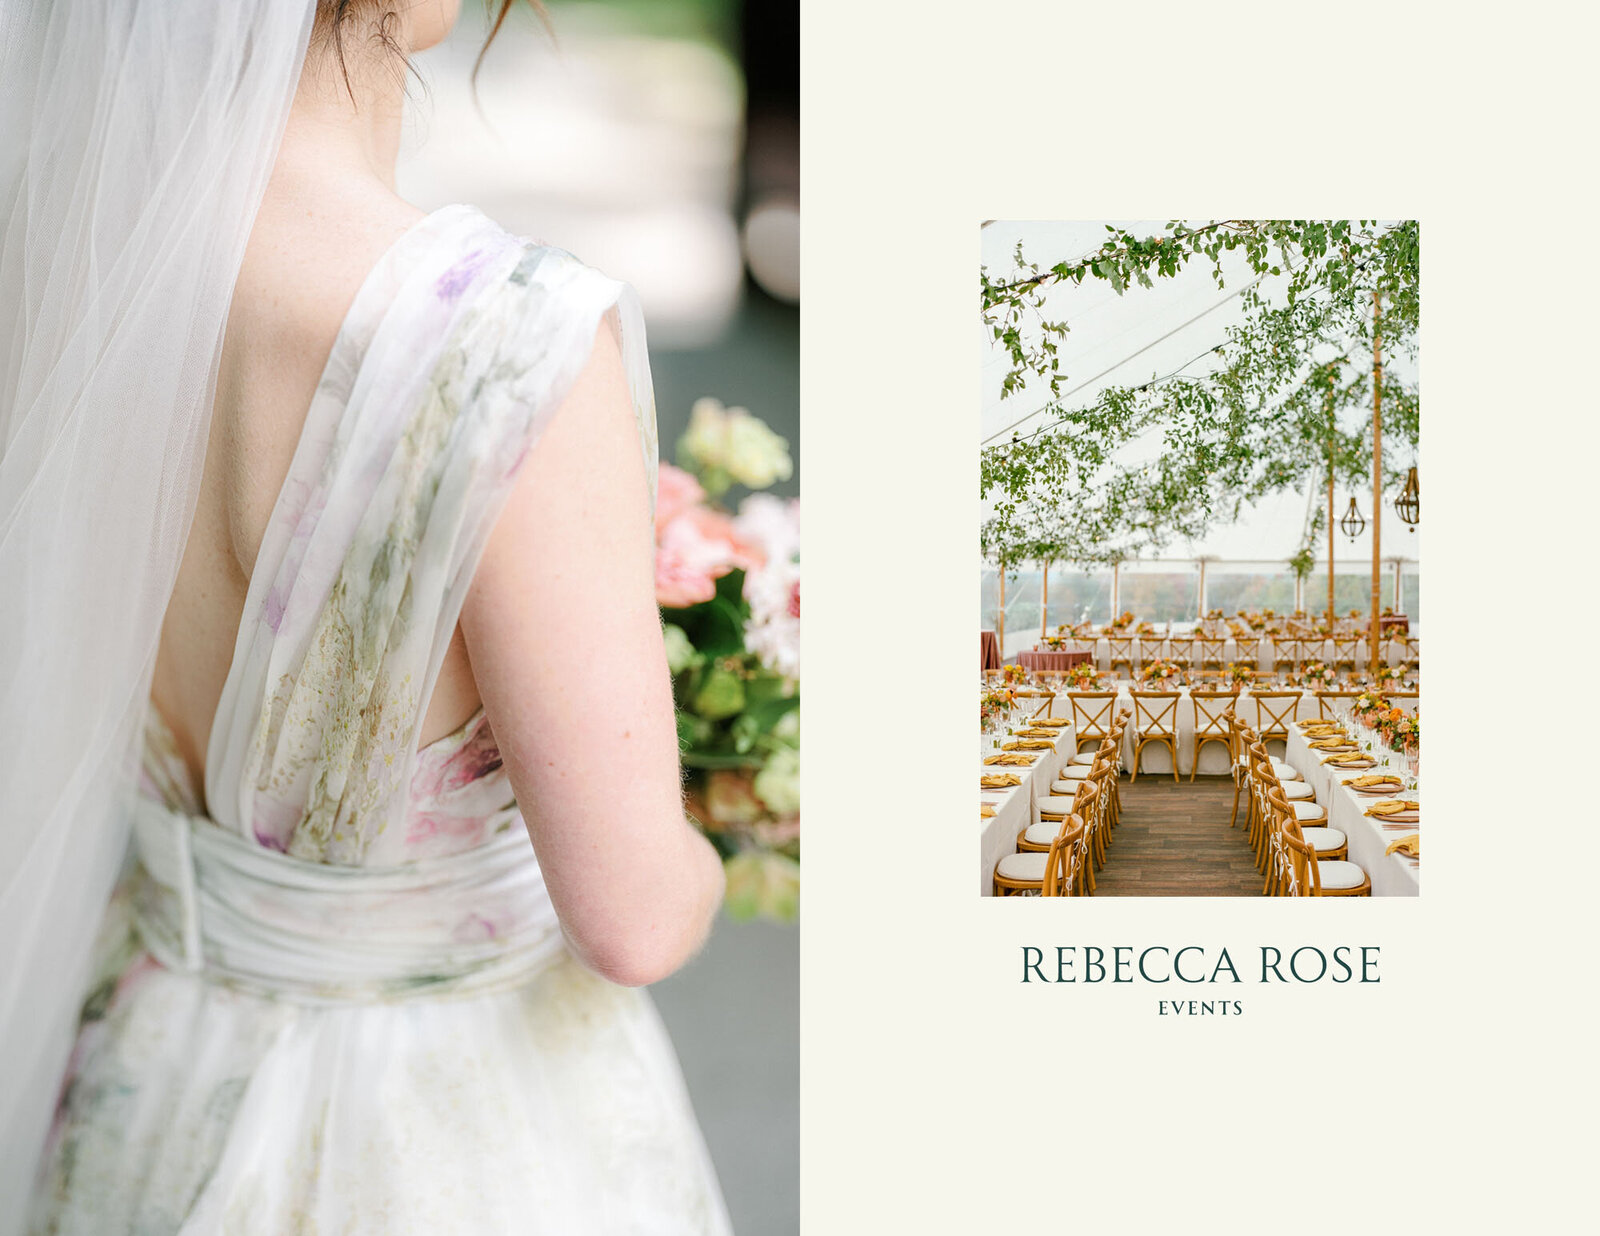 visual-identity-graphics-by letter-south-for-rebecca-rose-events-luxury-wedding-plannerRRE-Concept-primary-v2